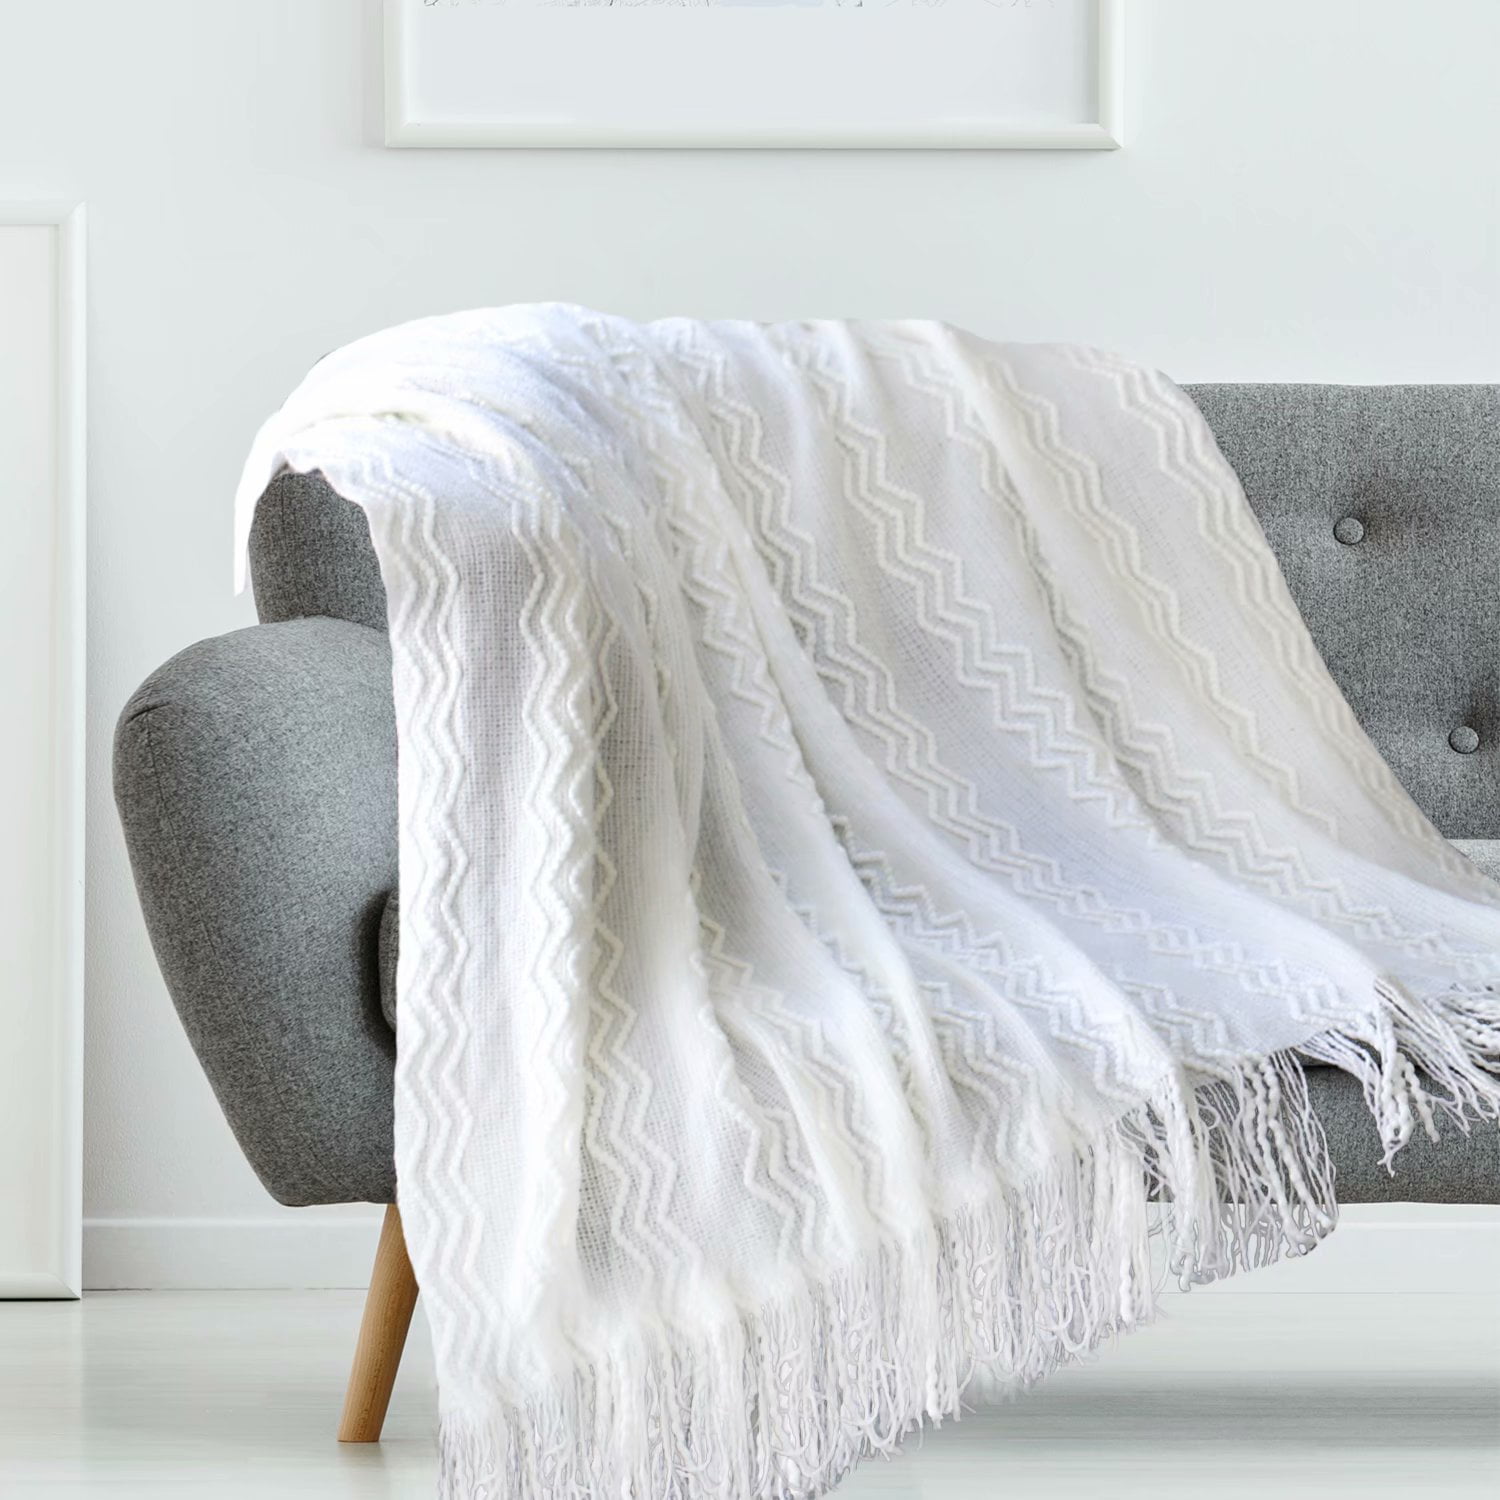 watersouprty Bohemian Cotton Woven Blanket Throw with Fringe Reversible Sofa Towel Knitted Couch Blanket Throw for Bed Chair Printed,90cm90cm Tassels Blanket